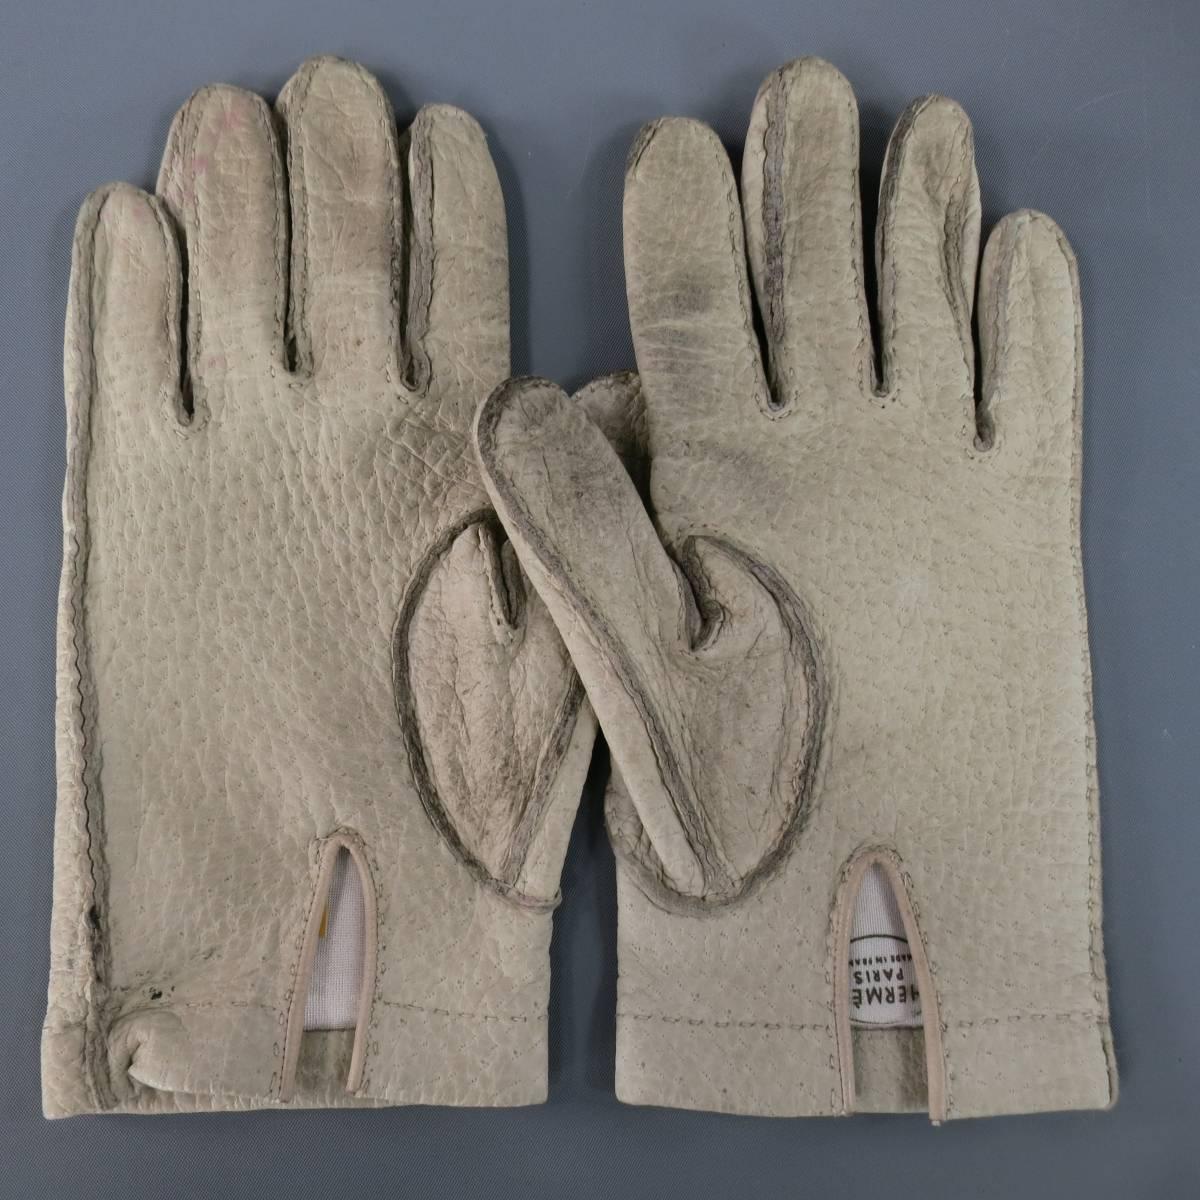 Vintage HERMES gloves in a beige ivory textured soft leather with top stitching throughout. Heavily worn and discolored. As-Is. Made in France.
 
Fair Pre-Owned Condition..
Marked: 7 1/2
 
Measurements:
Length: 9 in.
Width: 4 in.